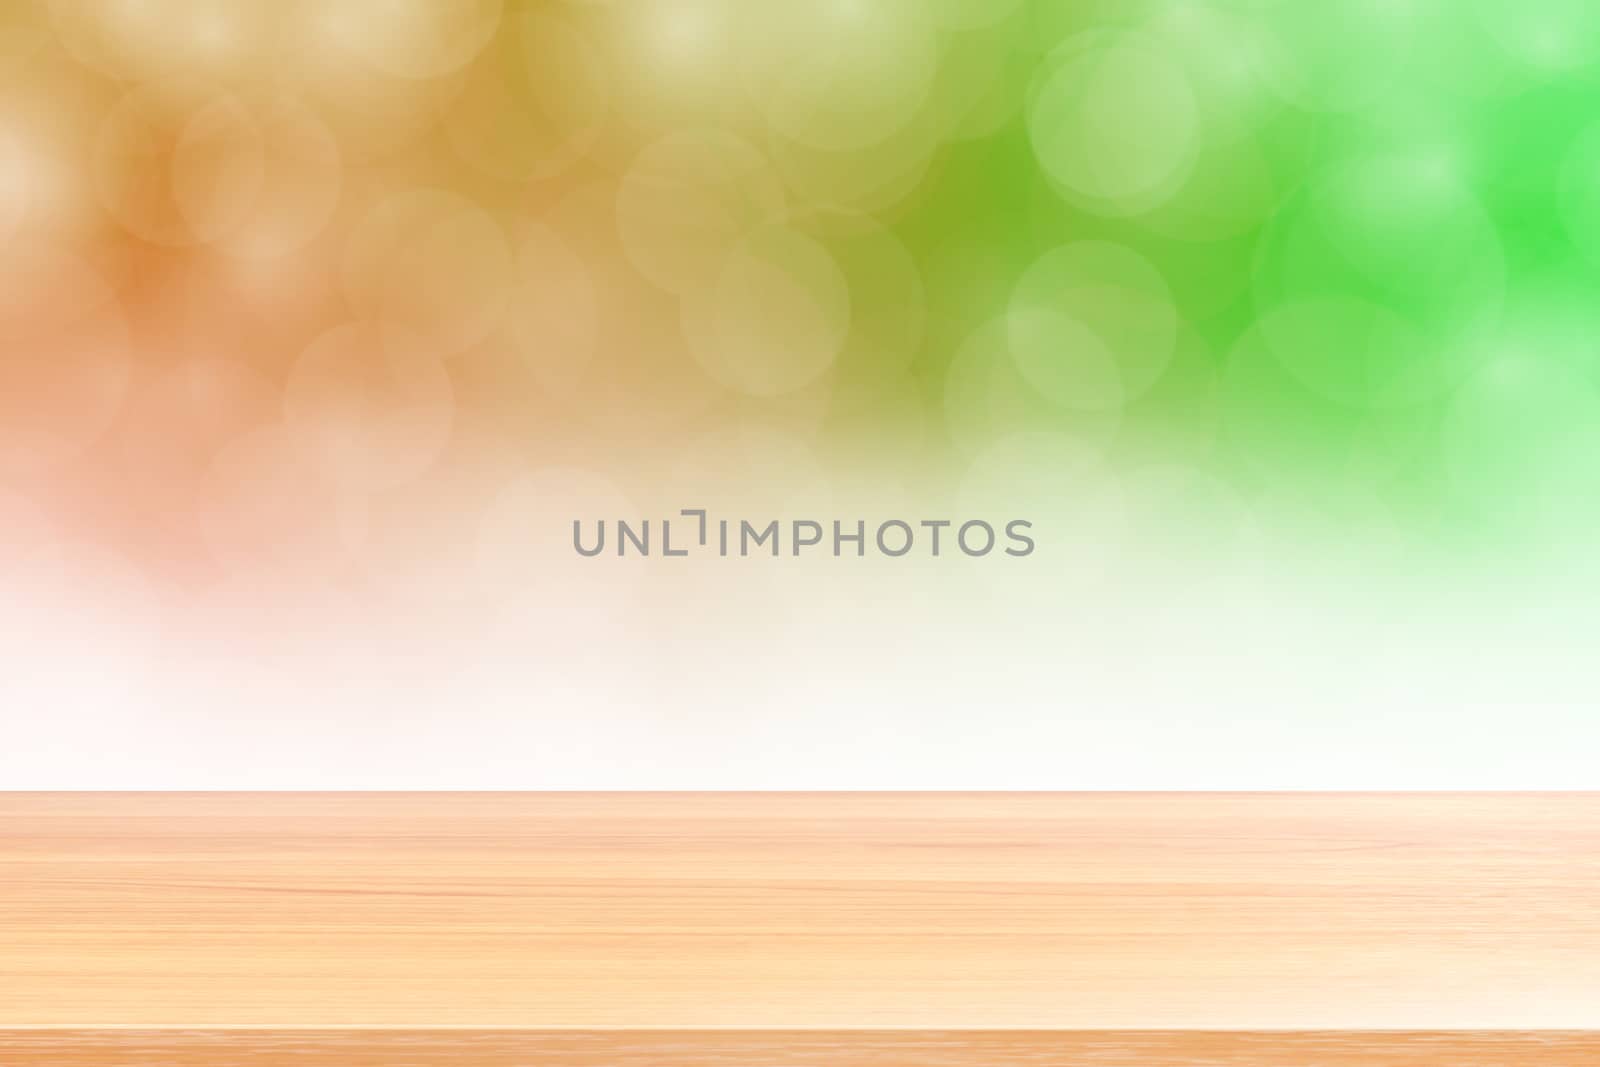 empty wood table floors on blurred bokeh soft green gradient background, wooden plank empty on green bokeh colorful light shade, colorful bokeh lights gradient soft for banner advertising products